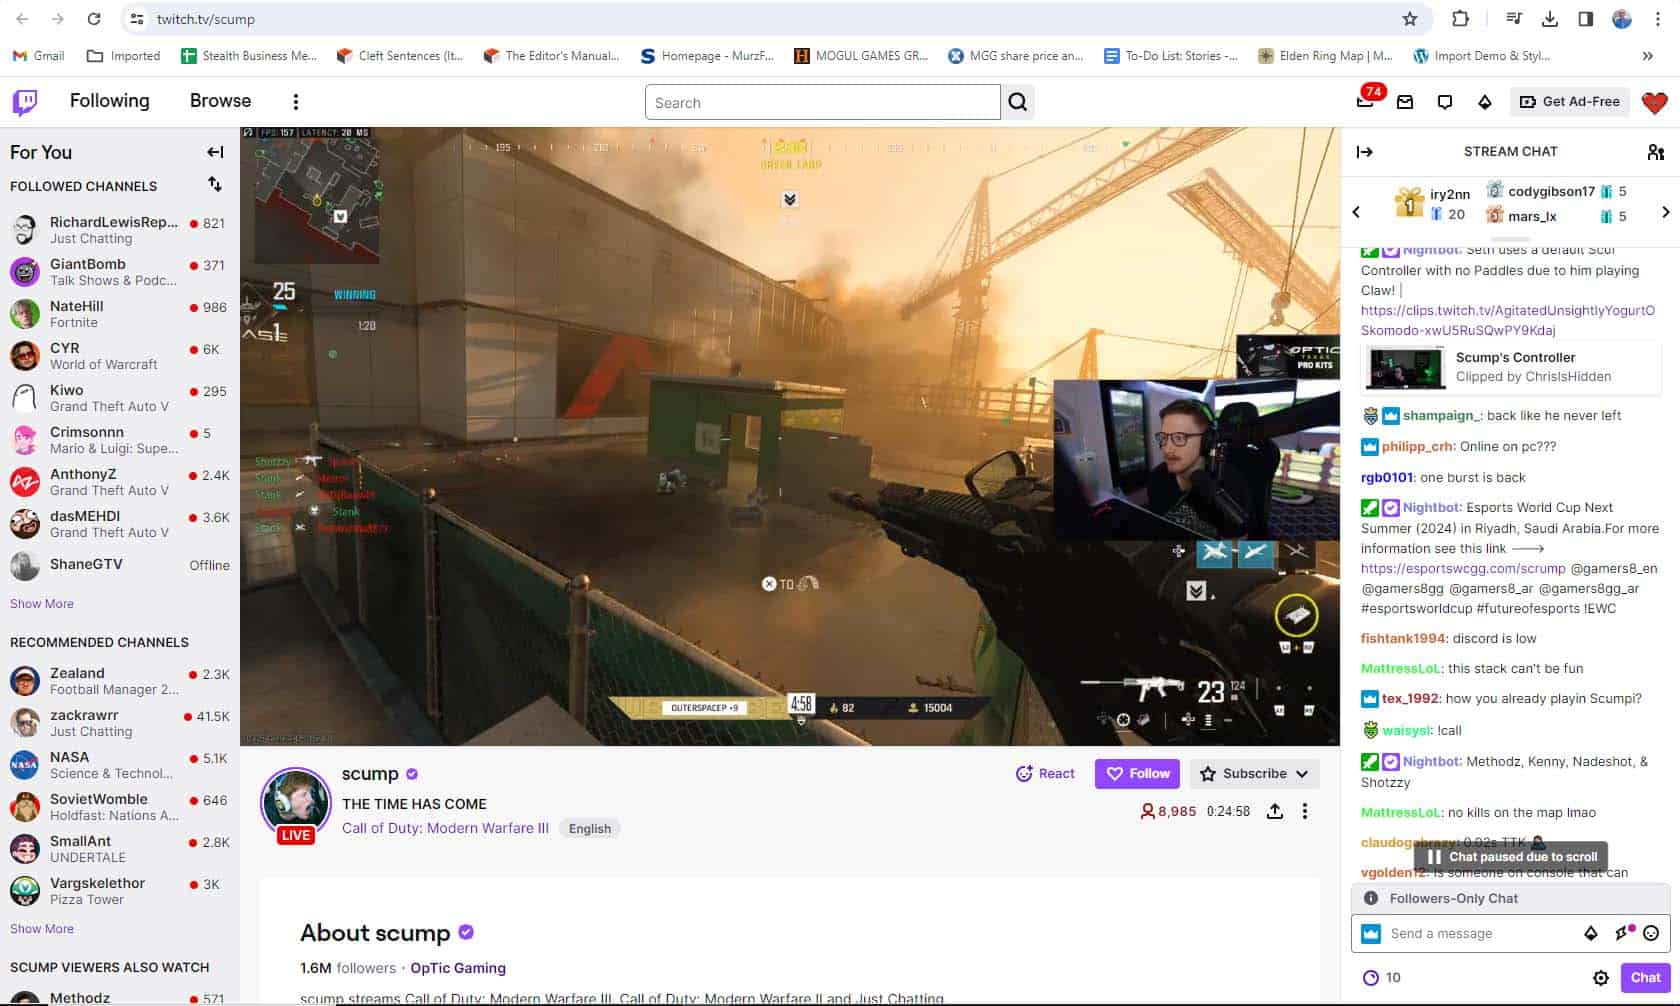 Twitch streamer scump promoting the Esports World Cup in his Twitch chat.